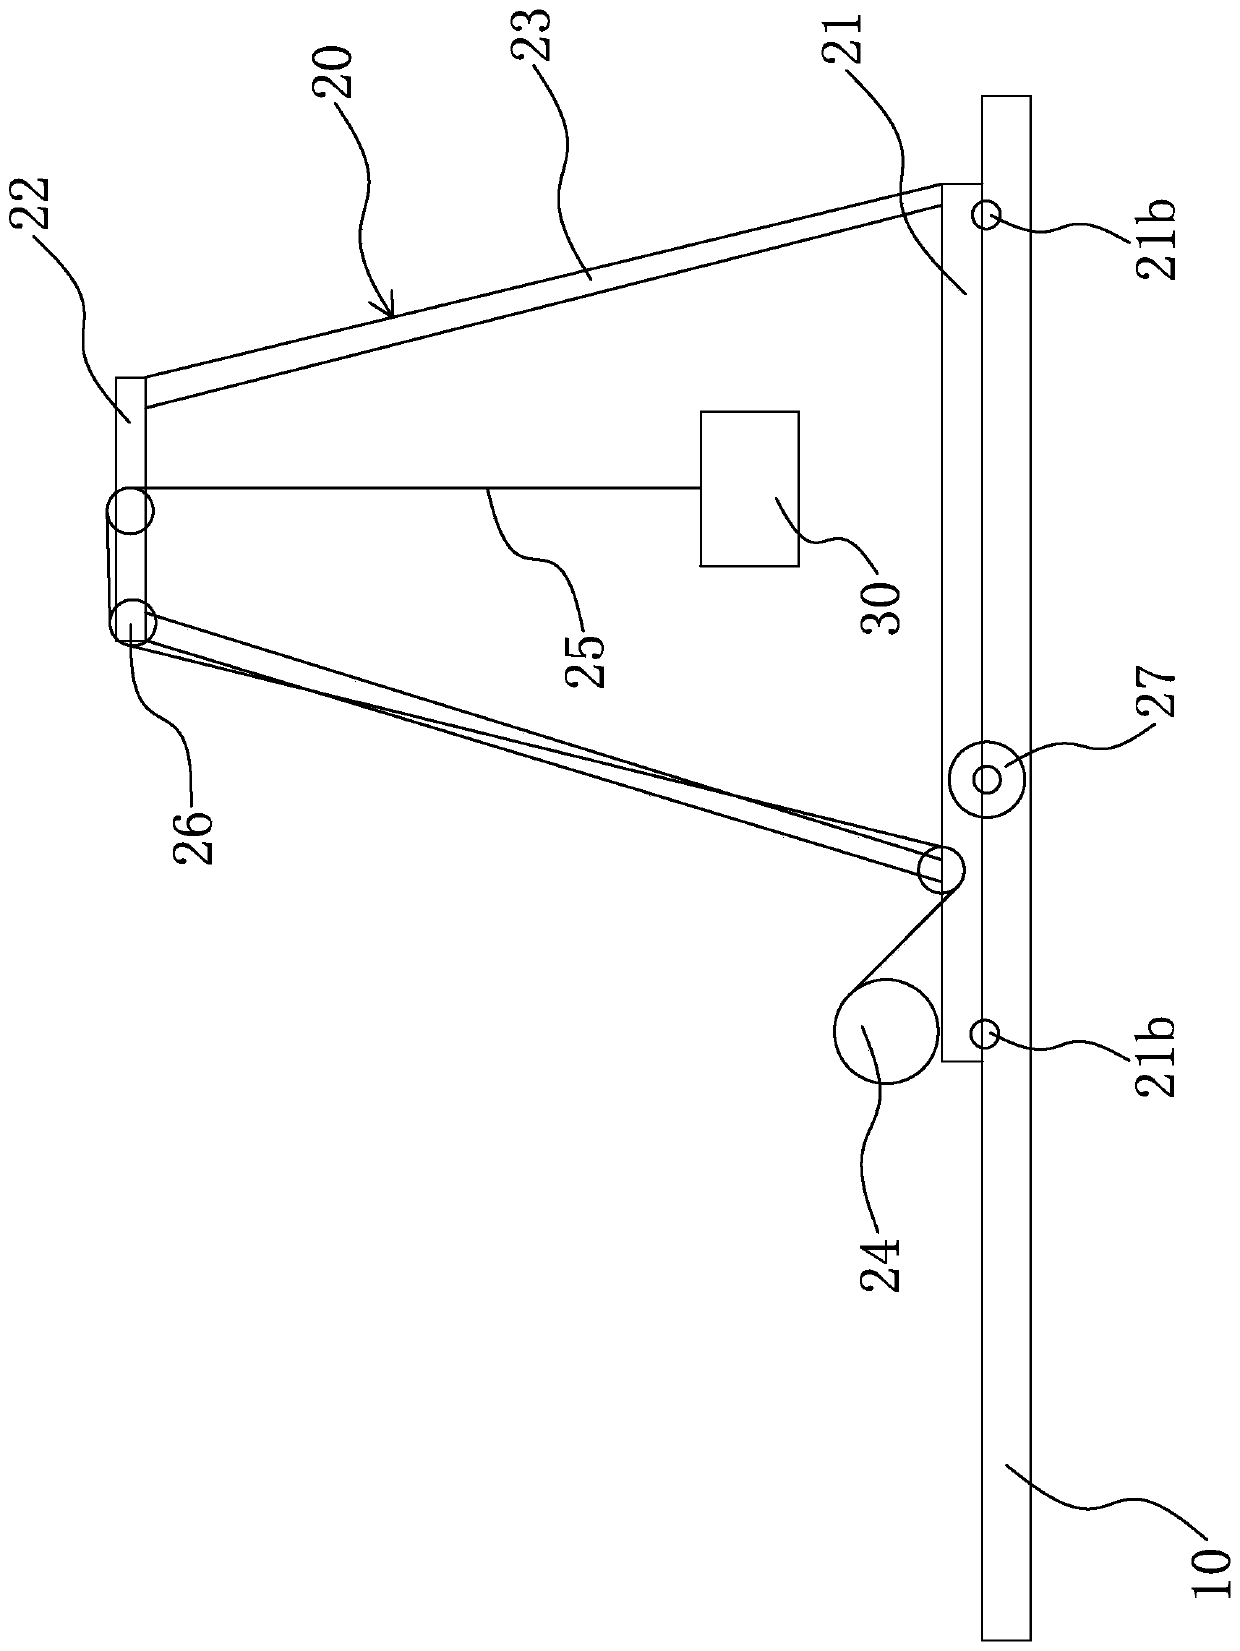 A sliding lifting bracket and its construction method